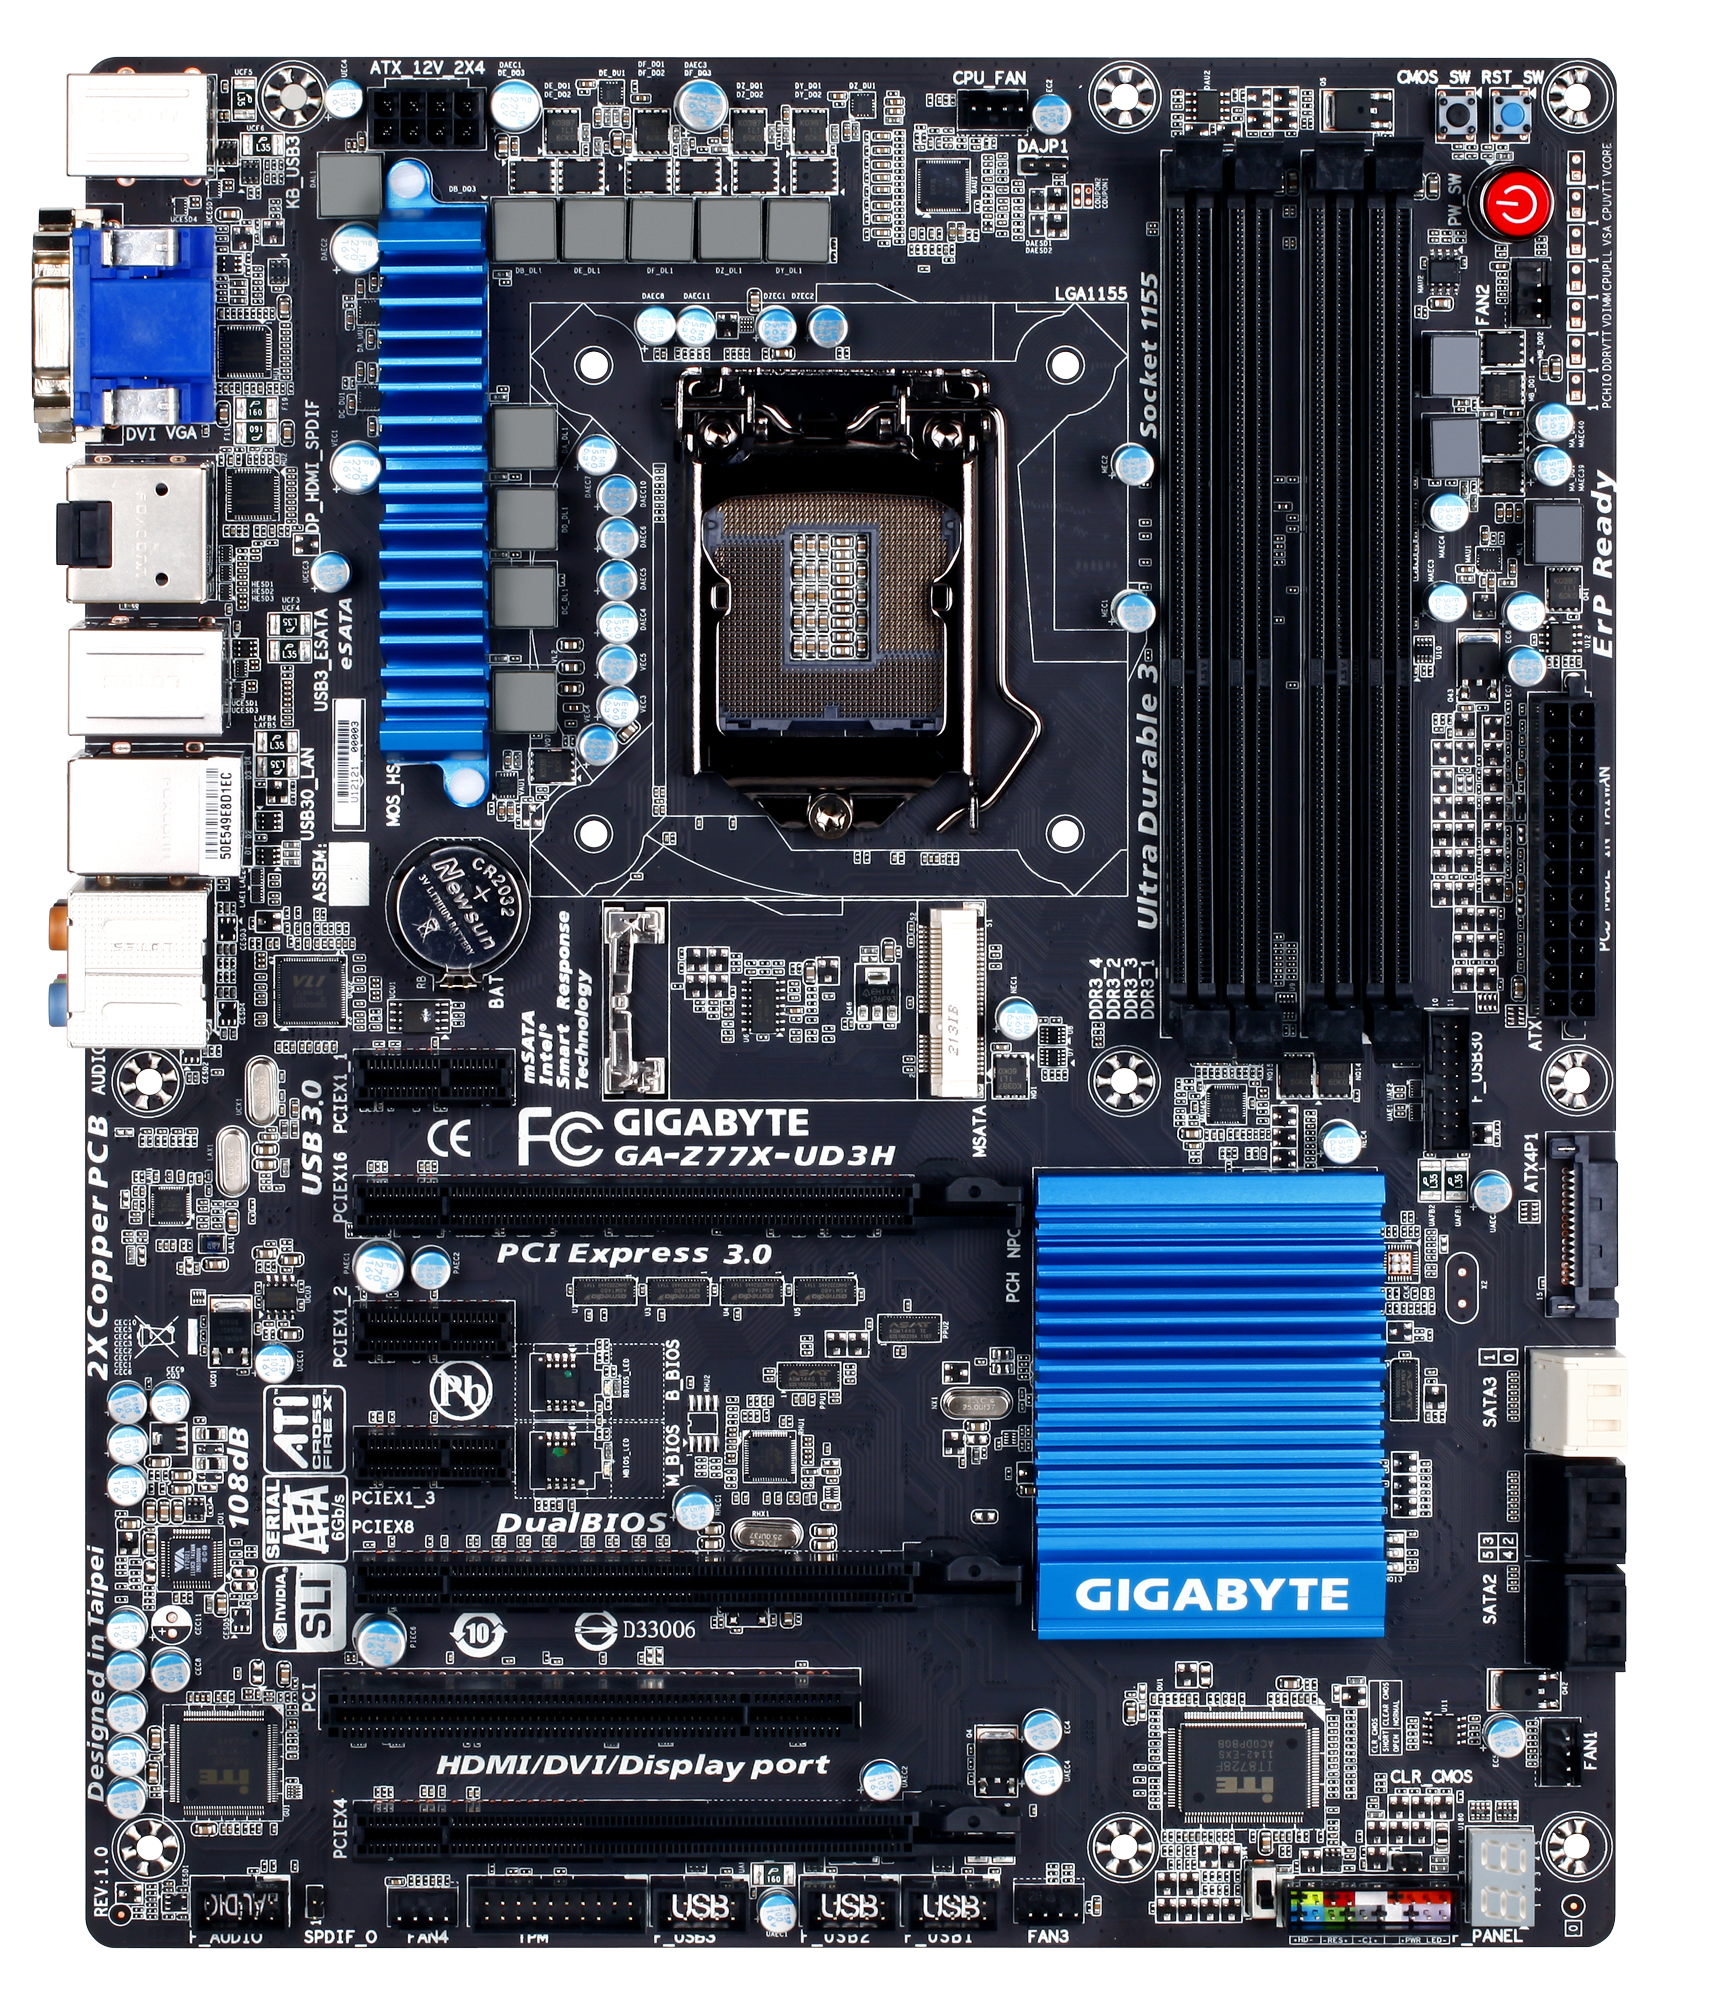 Intel Z77 Panther Point Chipset and Motherboard Preview - ASRock, ASUS, Gigabyte, MSI, ECS and 